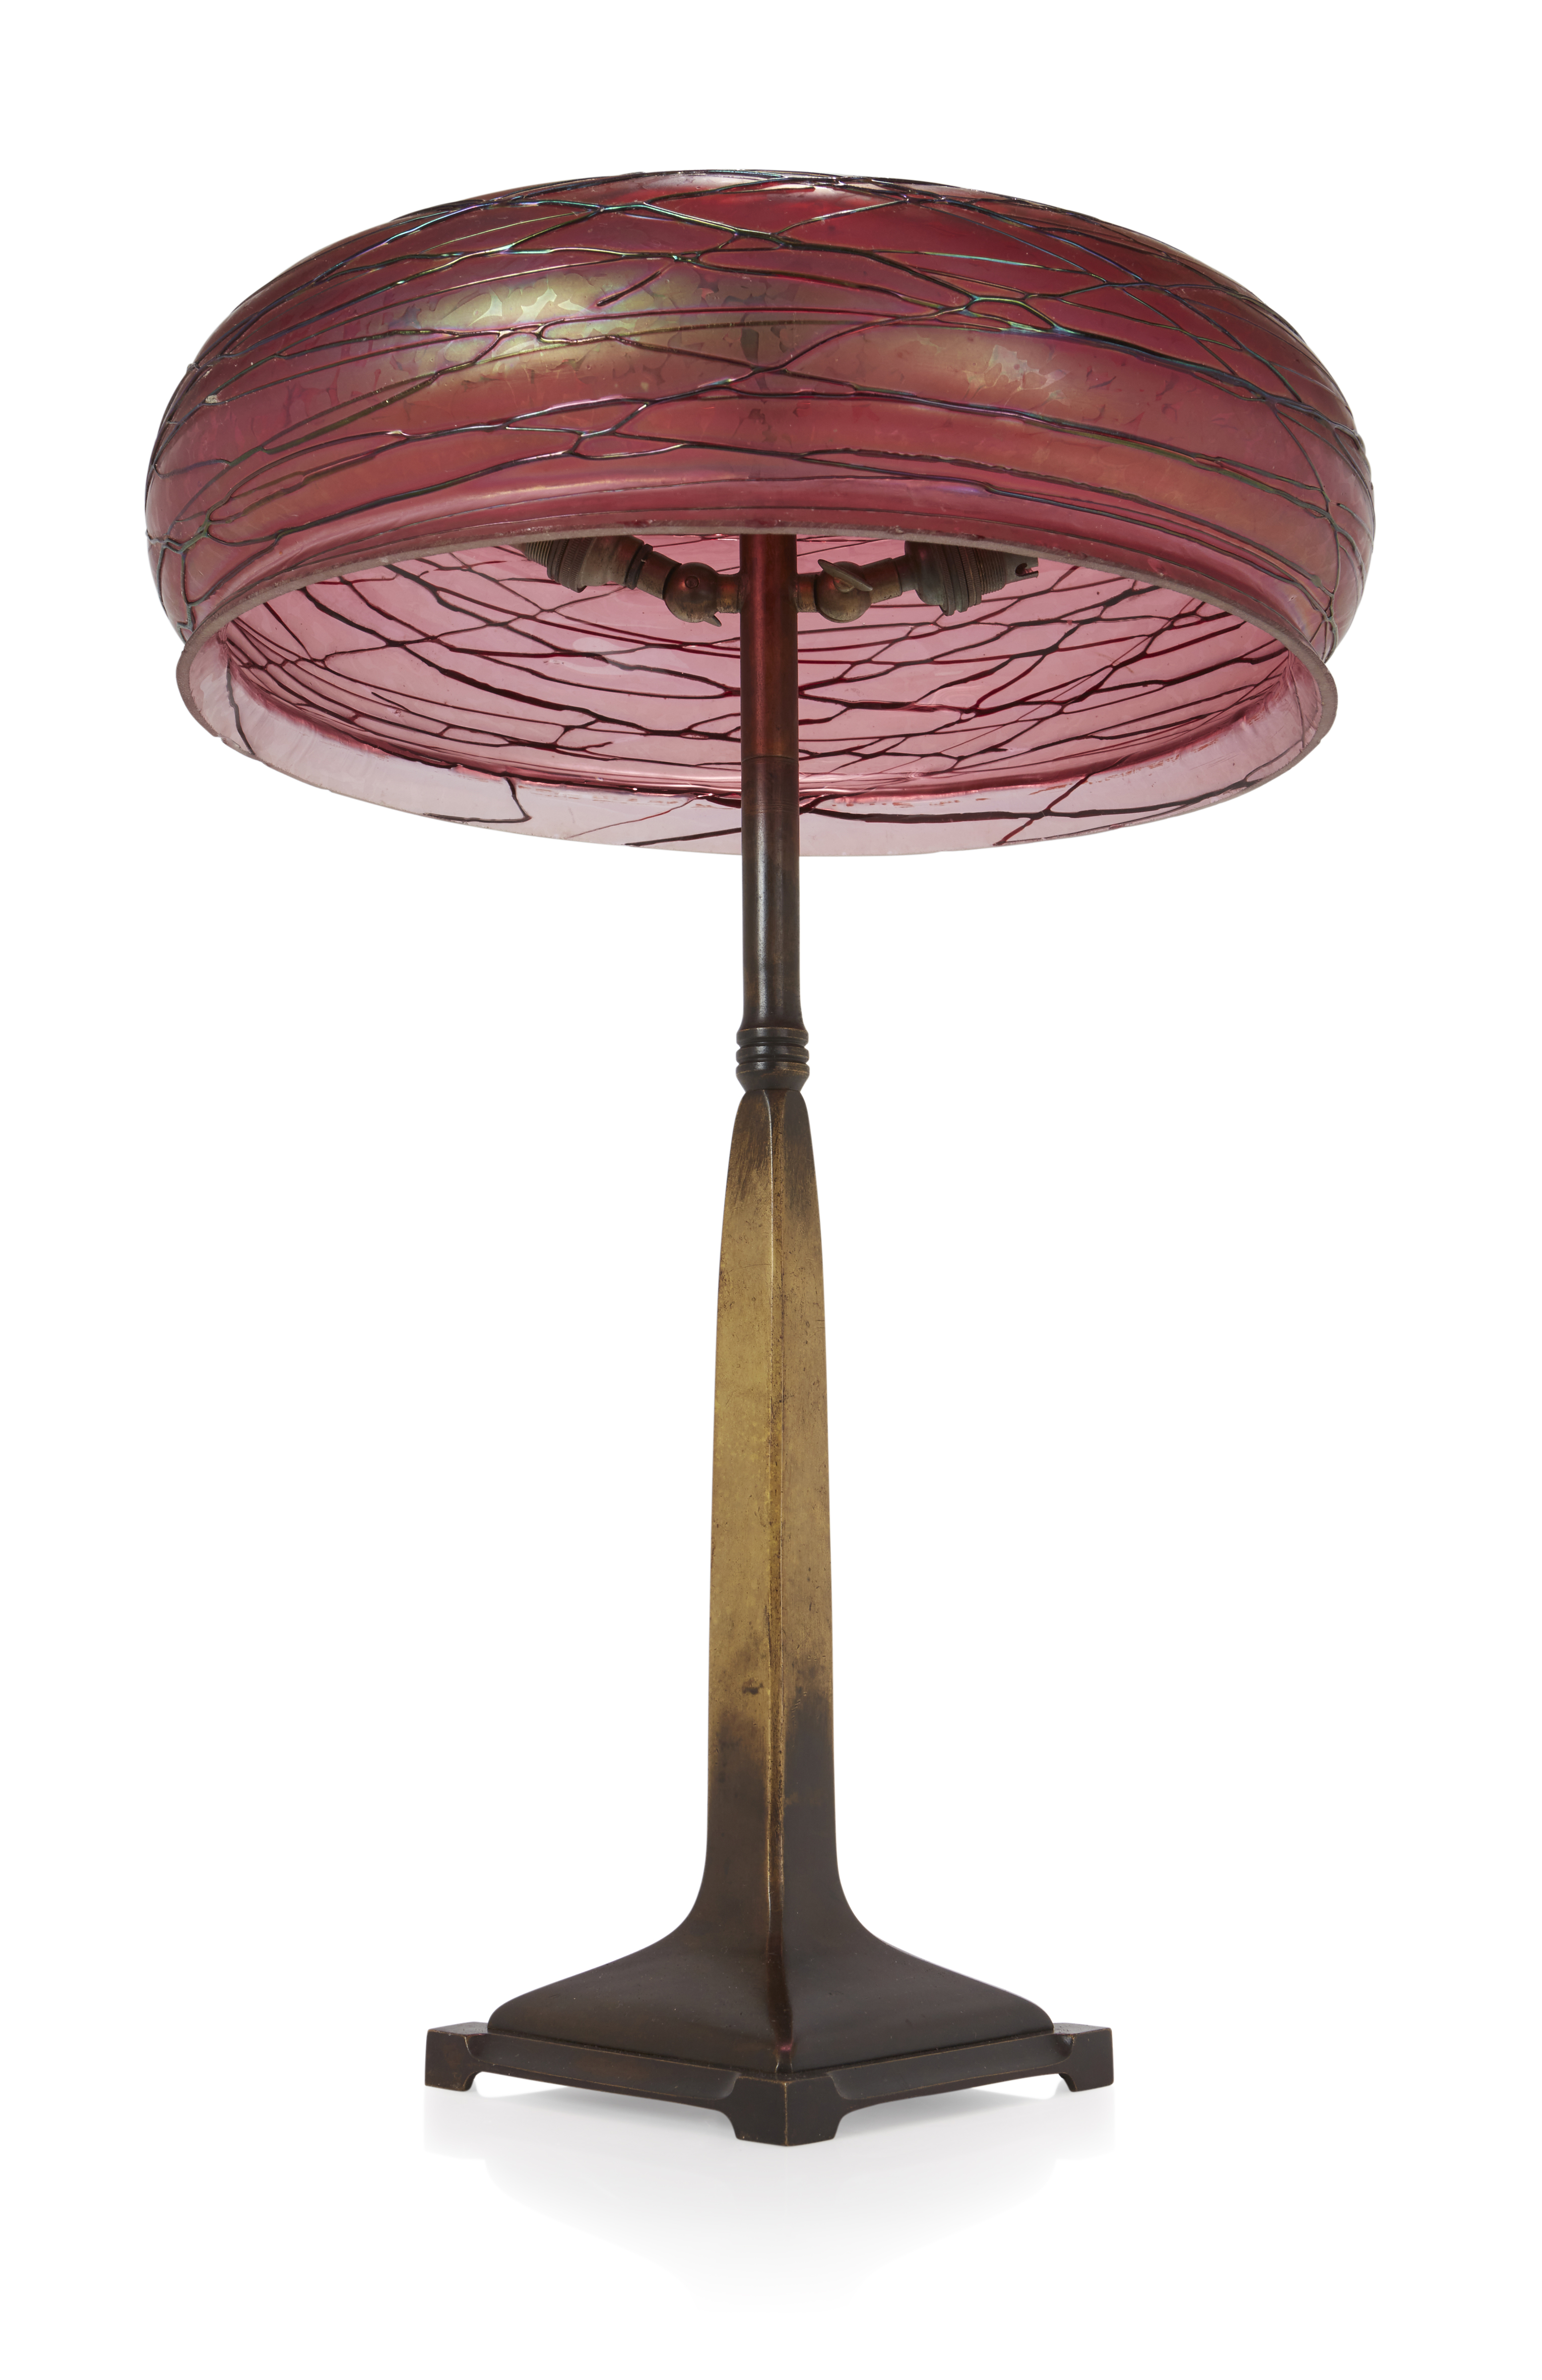 Attributed to Pallme Konig Art Nouveau table lamp with large domed shade in iridescent deep pink... - Image 3 of 3